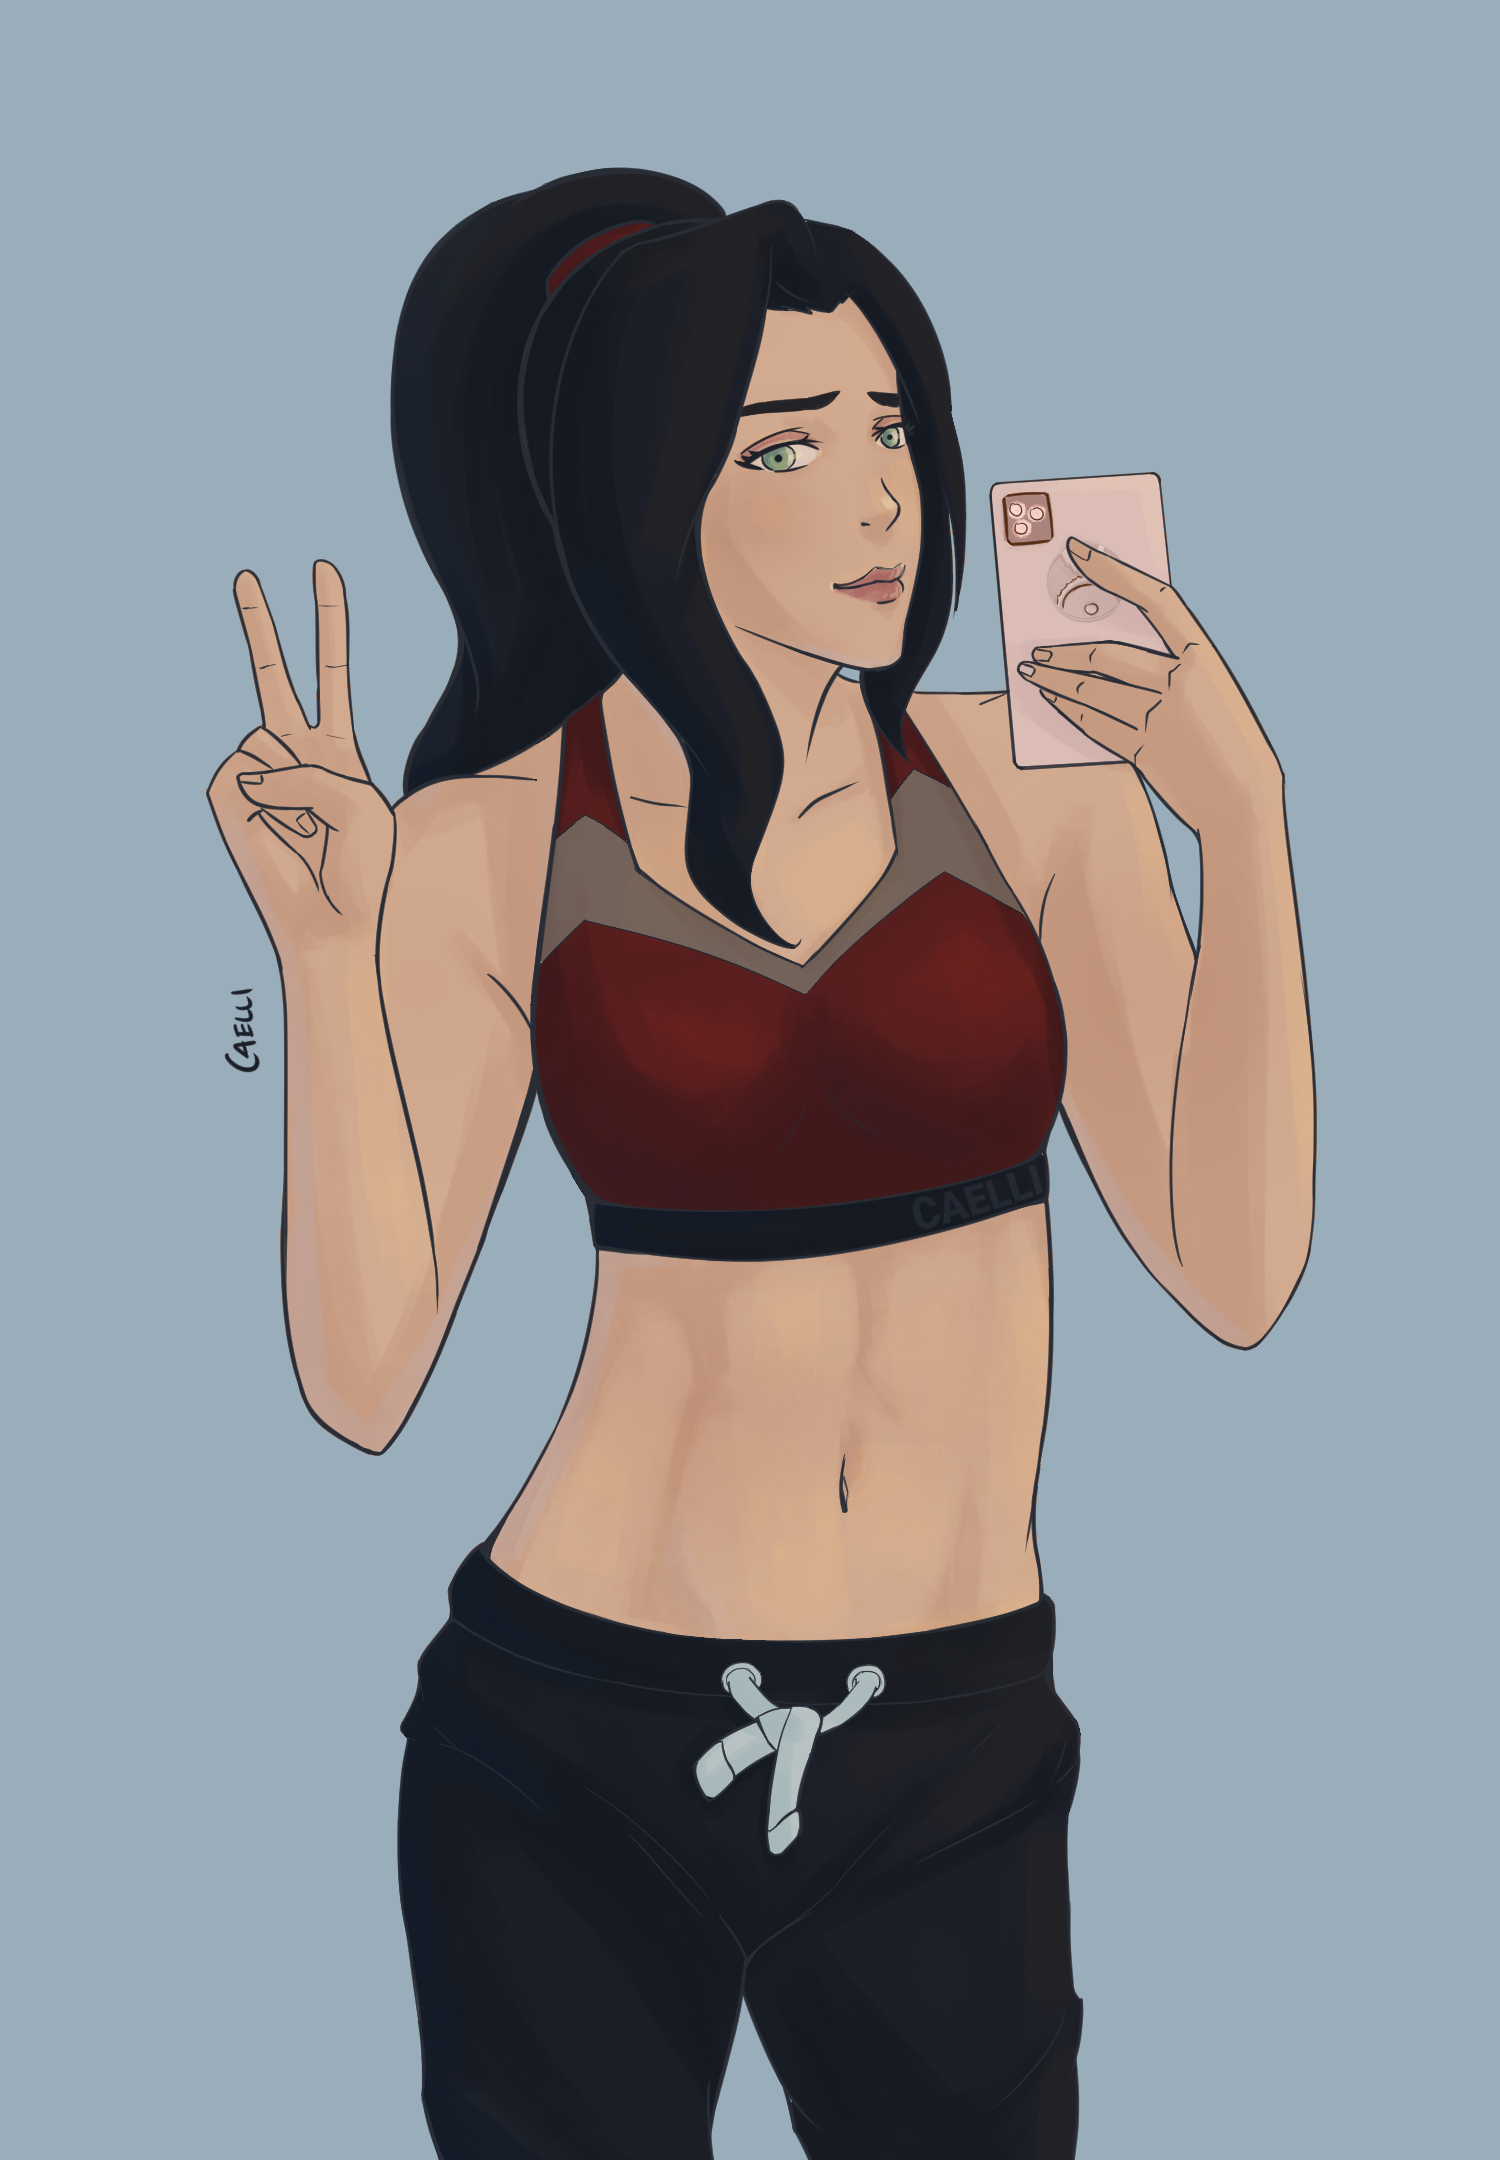 Asami's gym selfie wearing a sports bra and doing the peace sign.